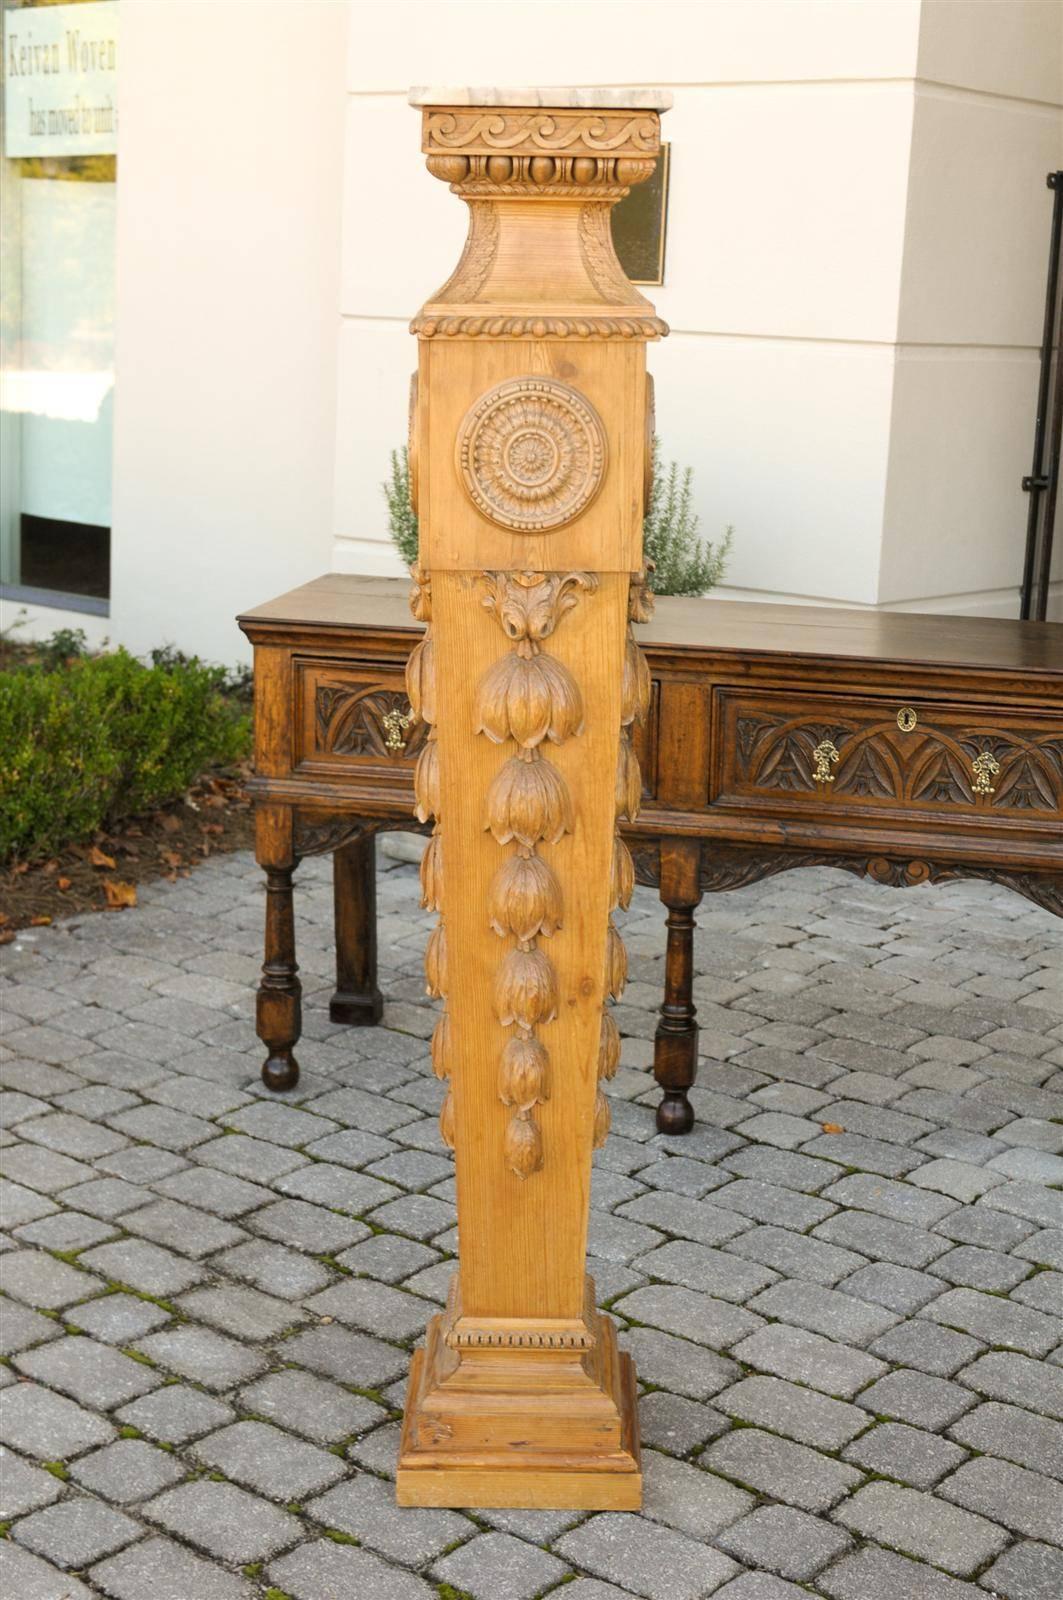 This pair of tall English Neoclassical style carved pine pedestals from the second half of the 19th century features exquisite square shaped marble tops over slender tapered, wooden bases. Just below the marble top, a Vitruvian scroll (also called